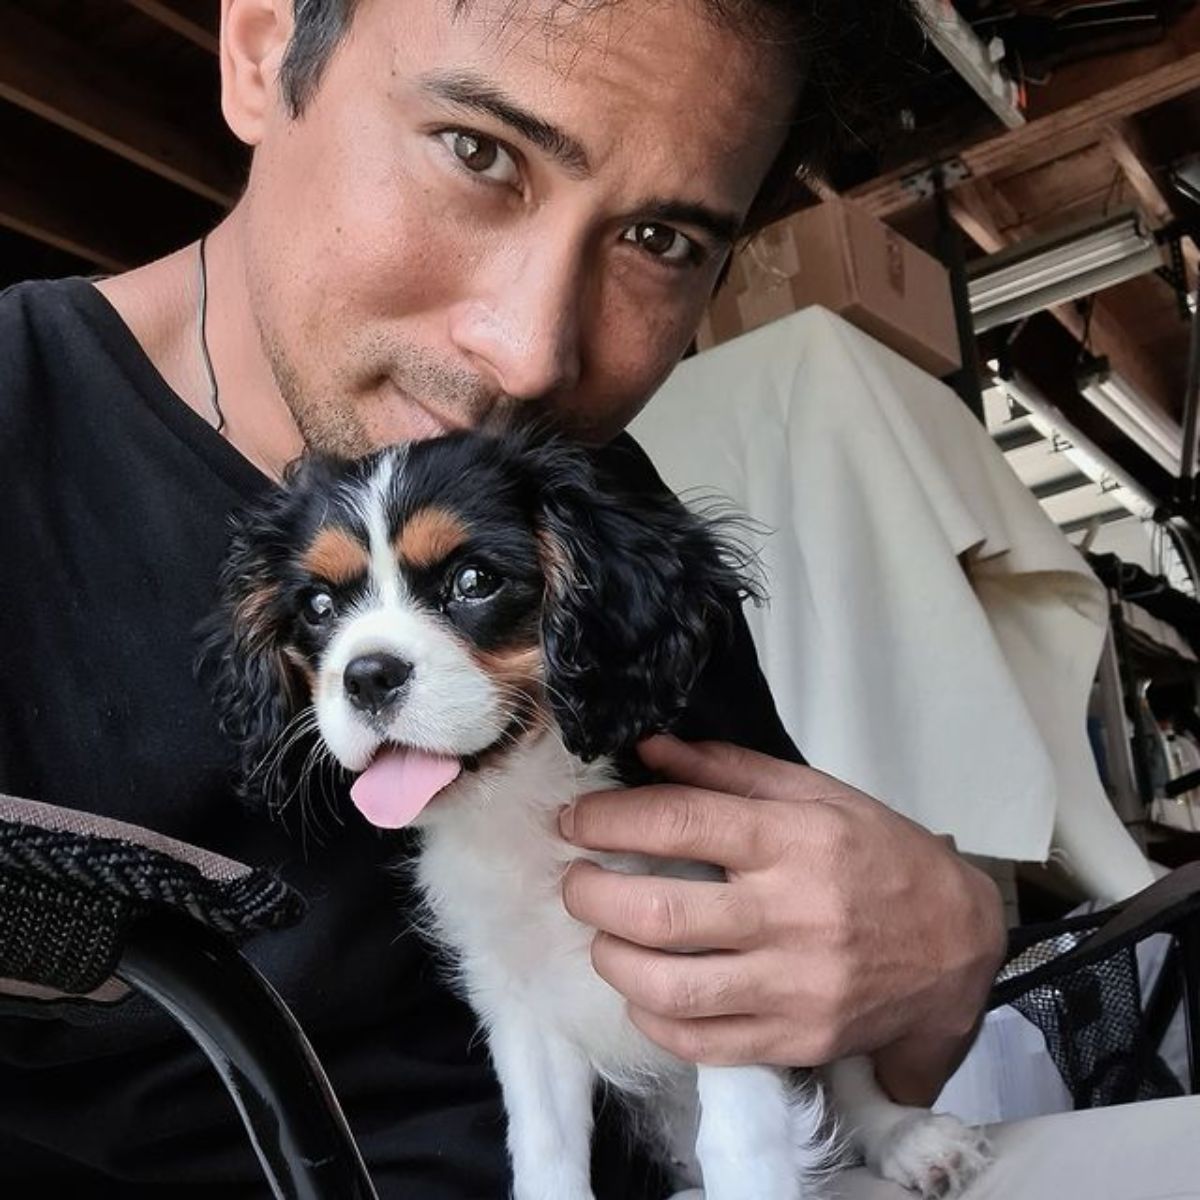 Sam Milby clicking selfie while holding his cute dog, Bailey